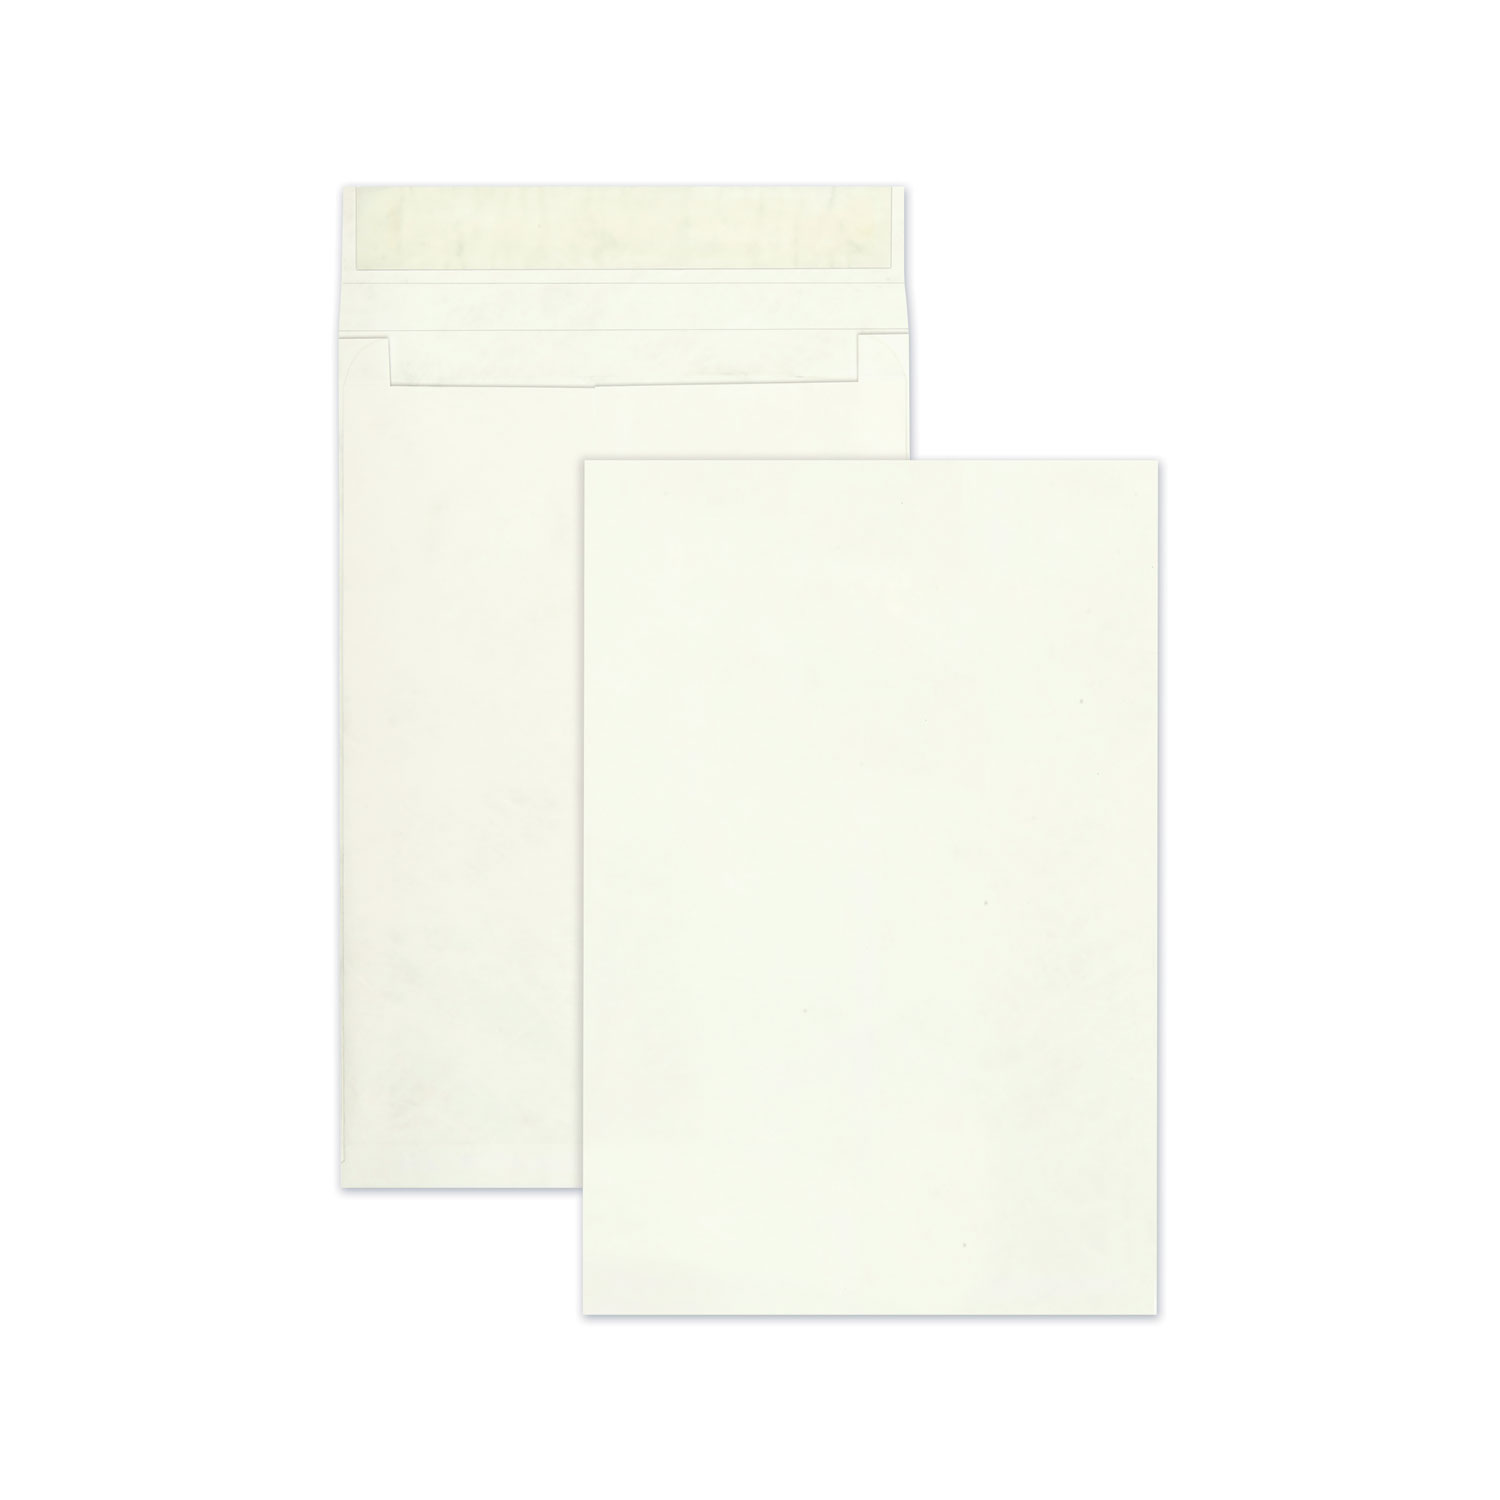 Open End Expansion Mailers, DuPont Tyvek, #15 1/2, Cheese Blade Flap, Redi-Strip Closure, 12 x 16, White, 25/Box